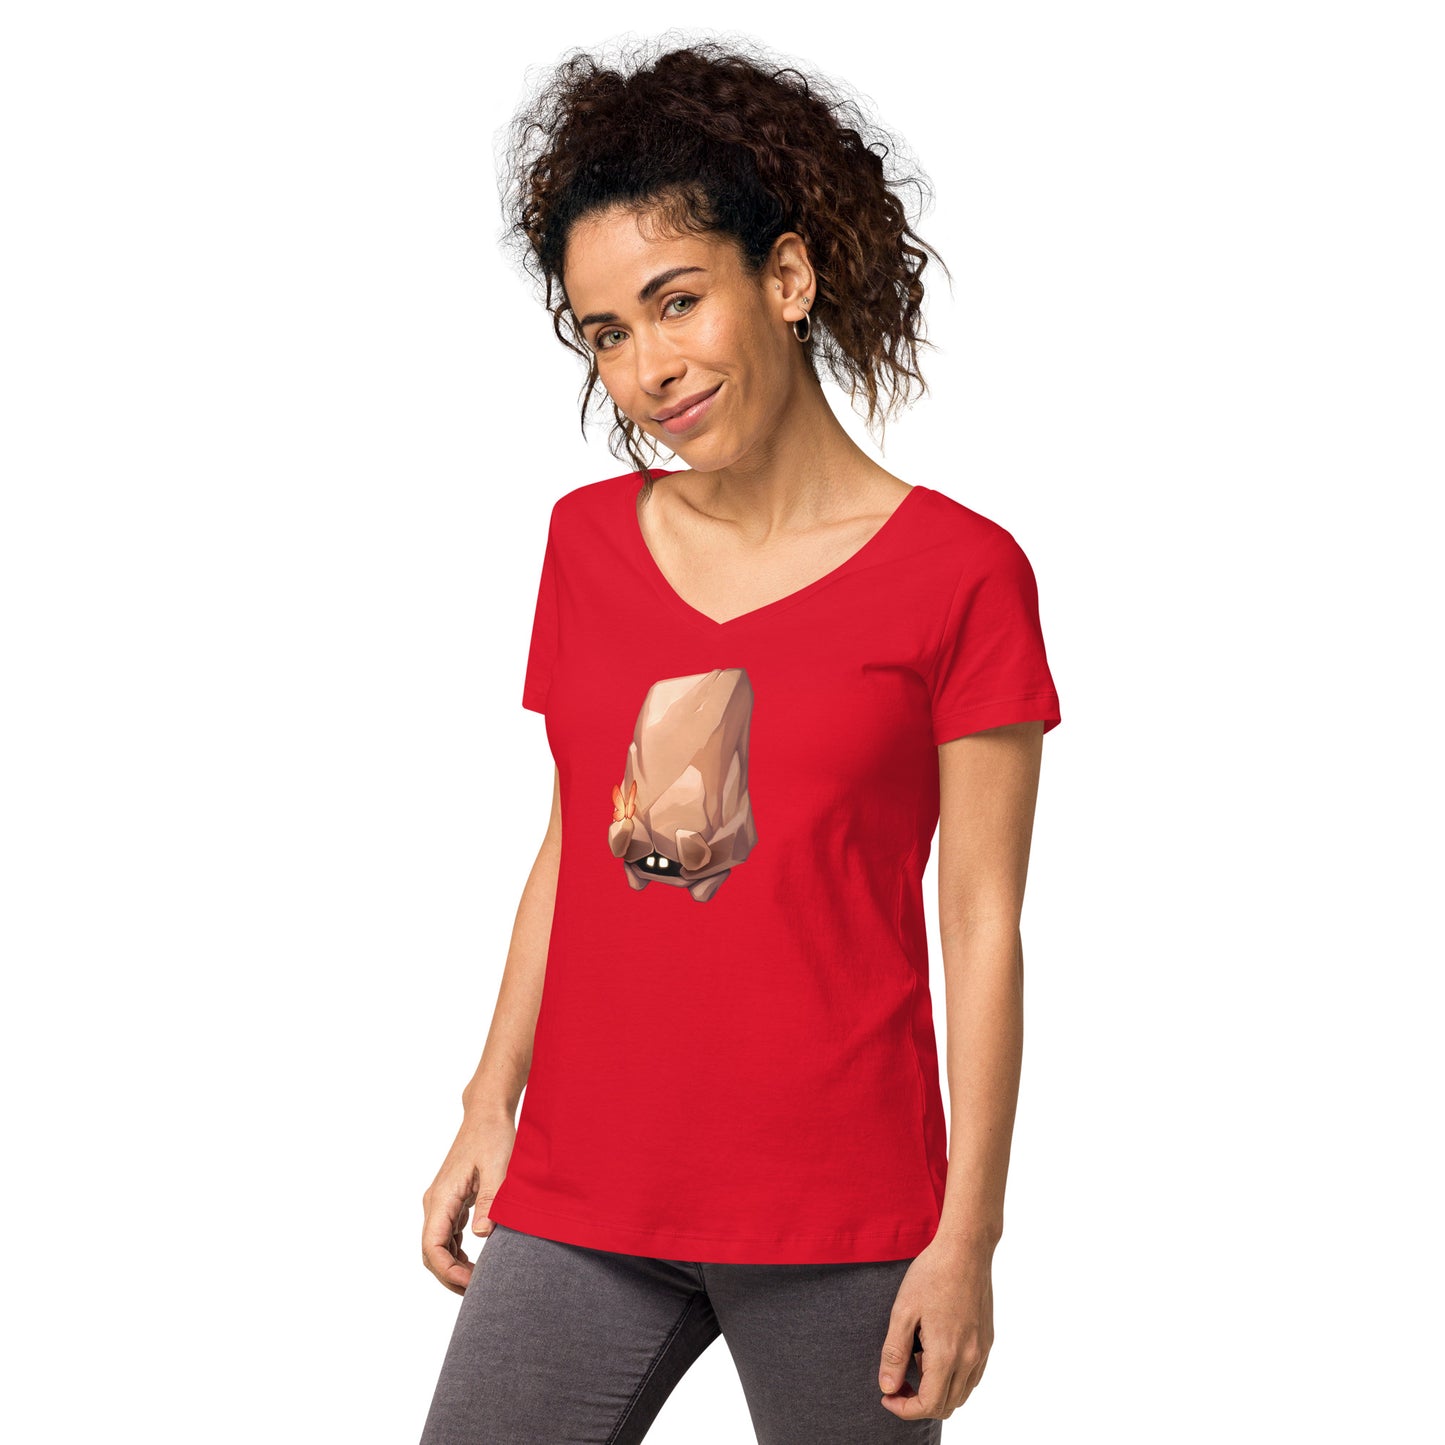 Women’s fitted v-neck t-shirt: Terry